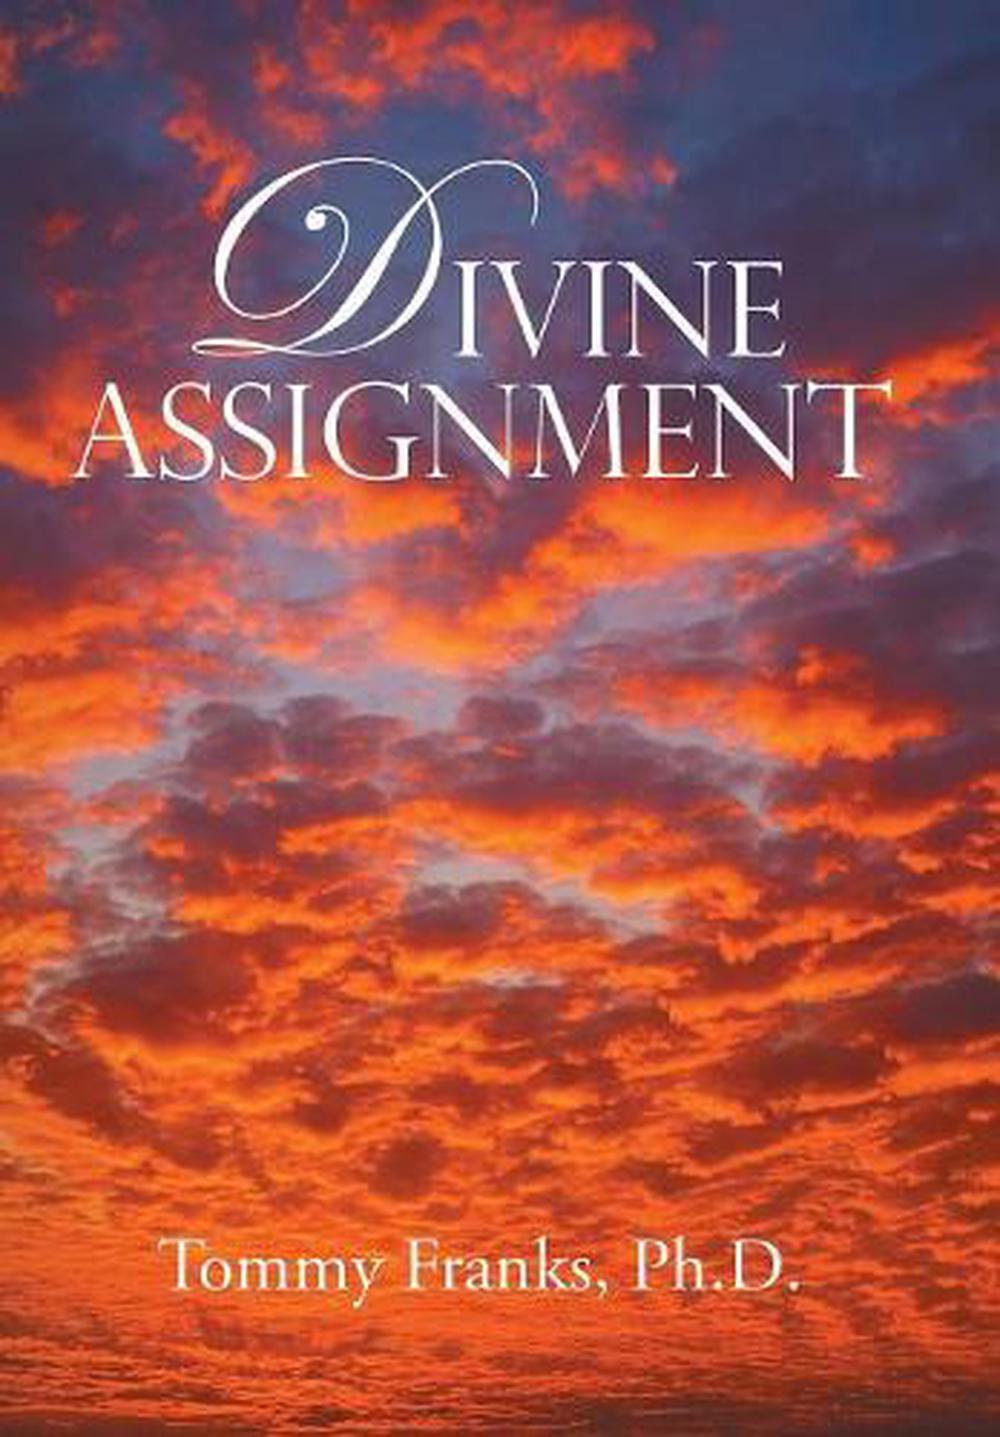 what is a divine assignment